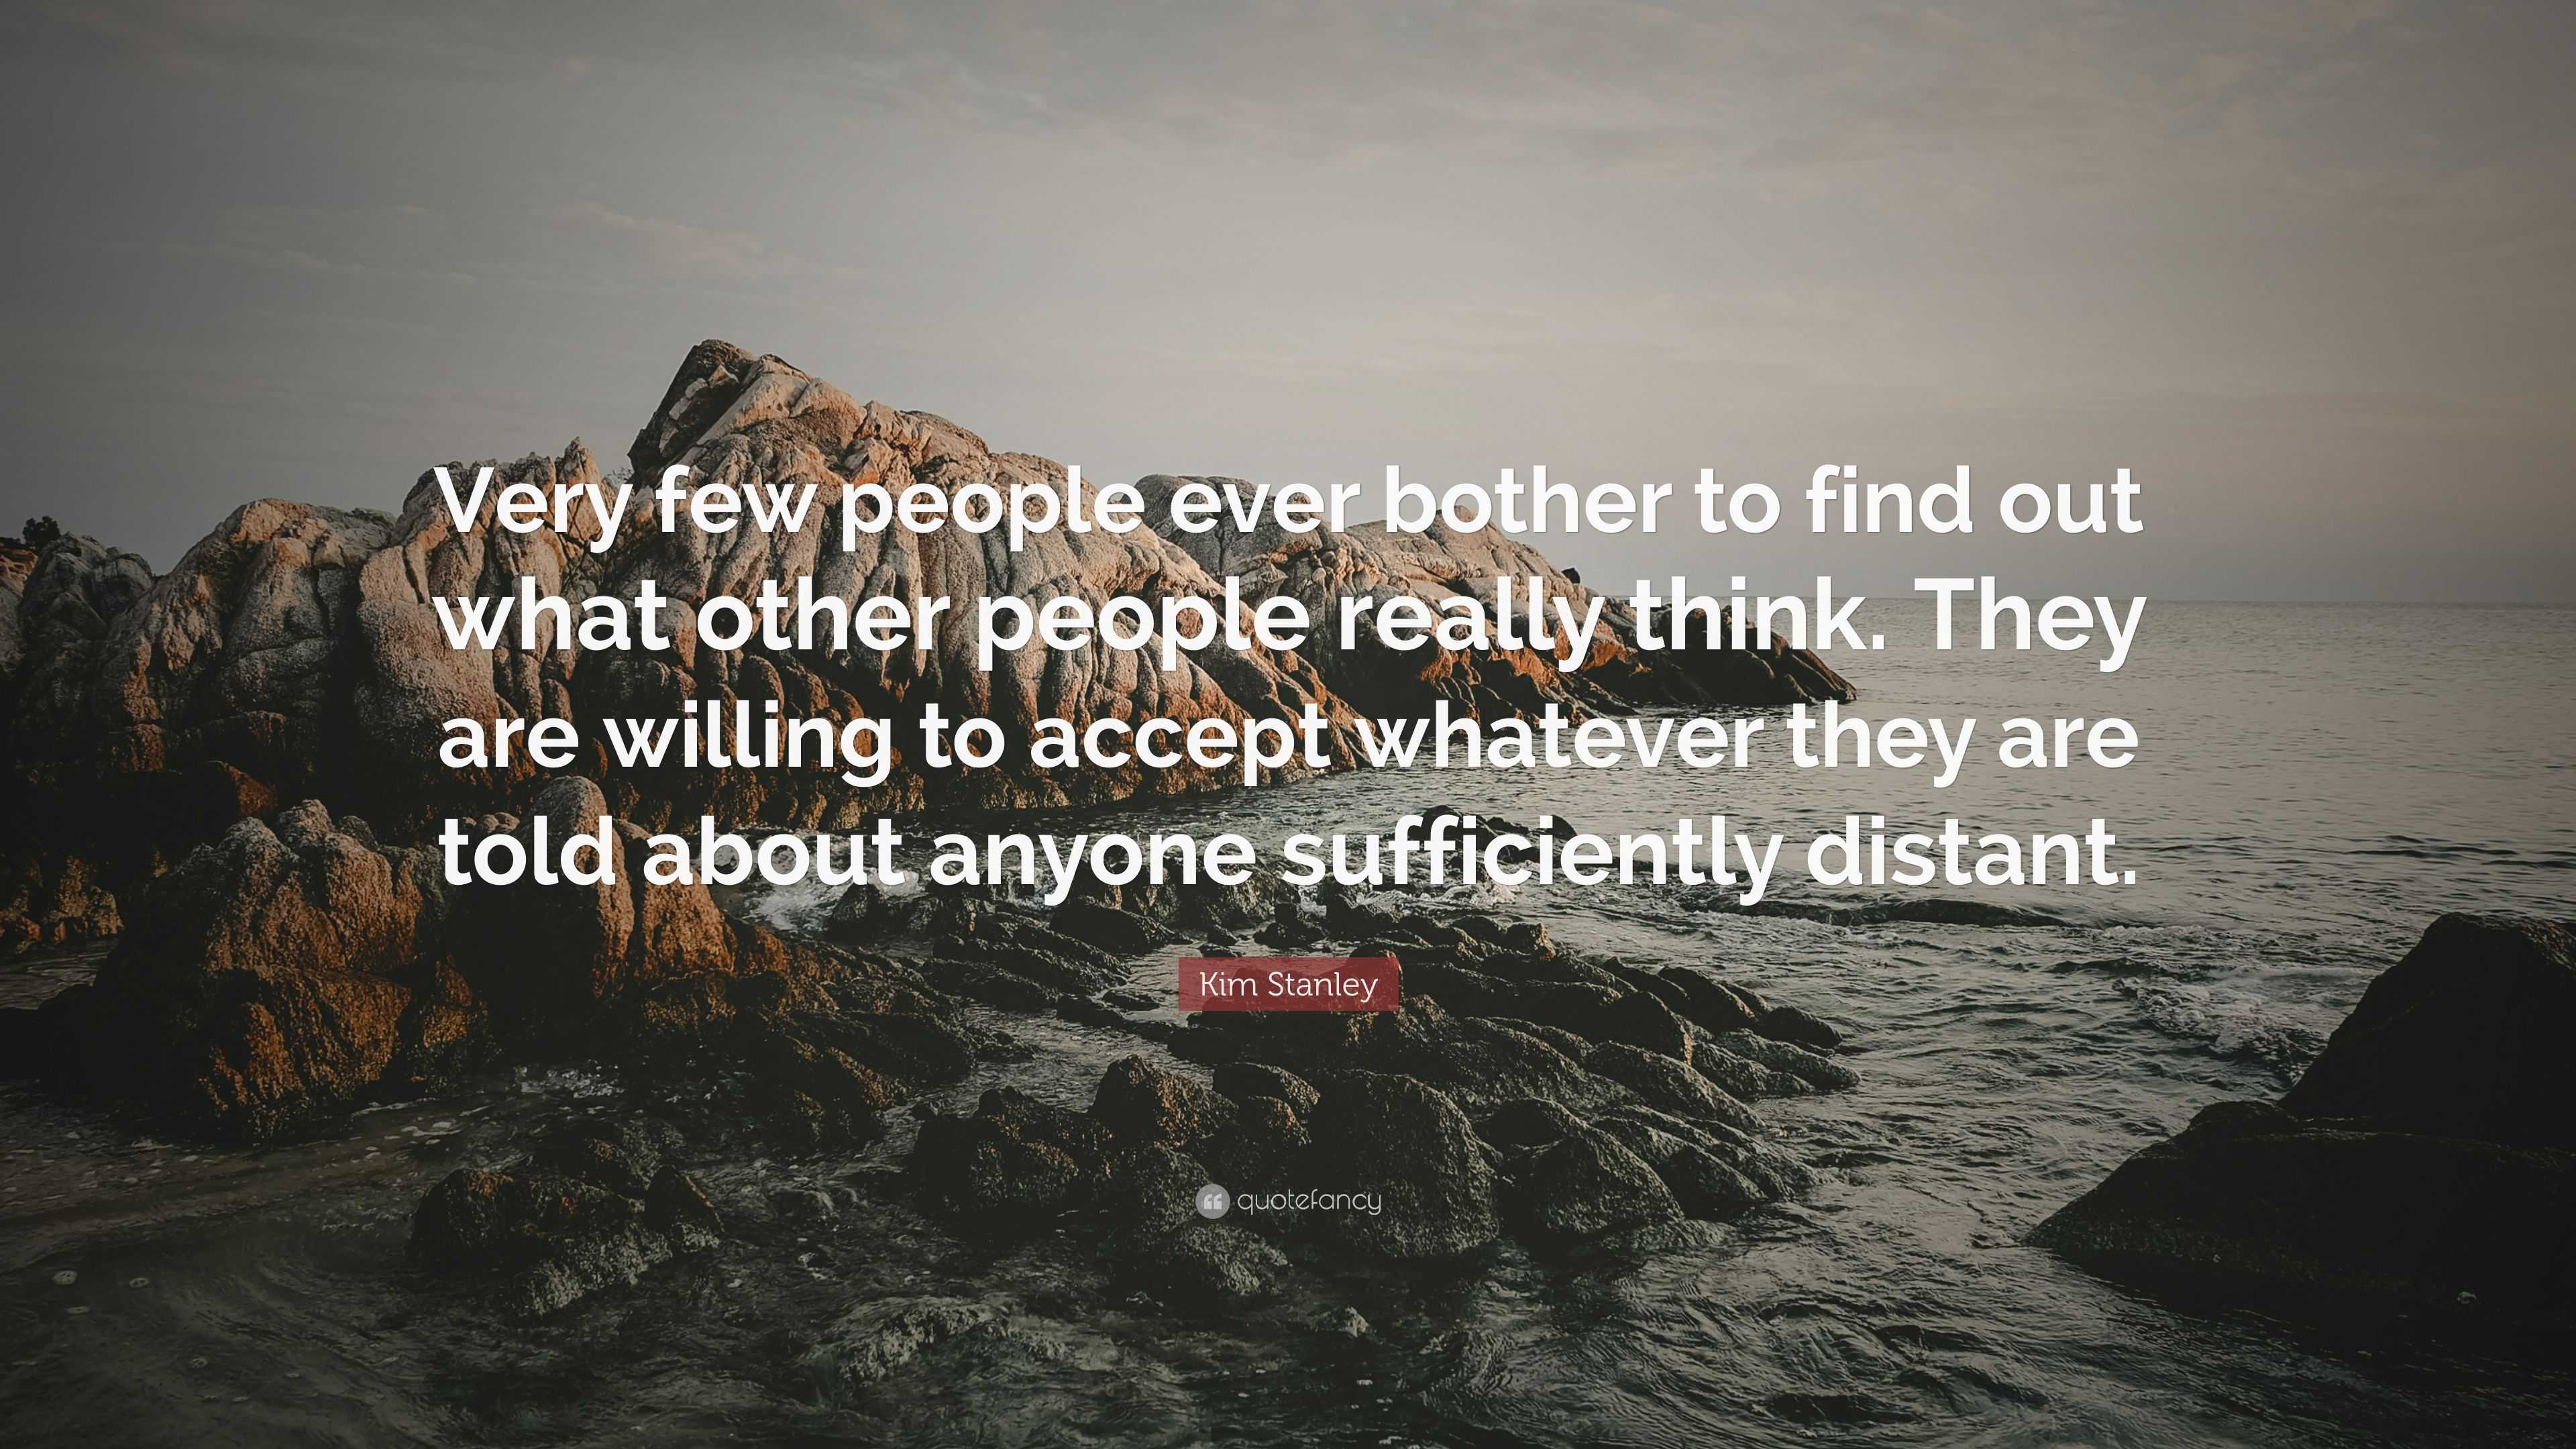 Kim Stanley Quote: “Very few people ever bother to find out what other ...